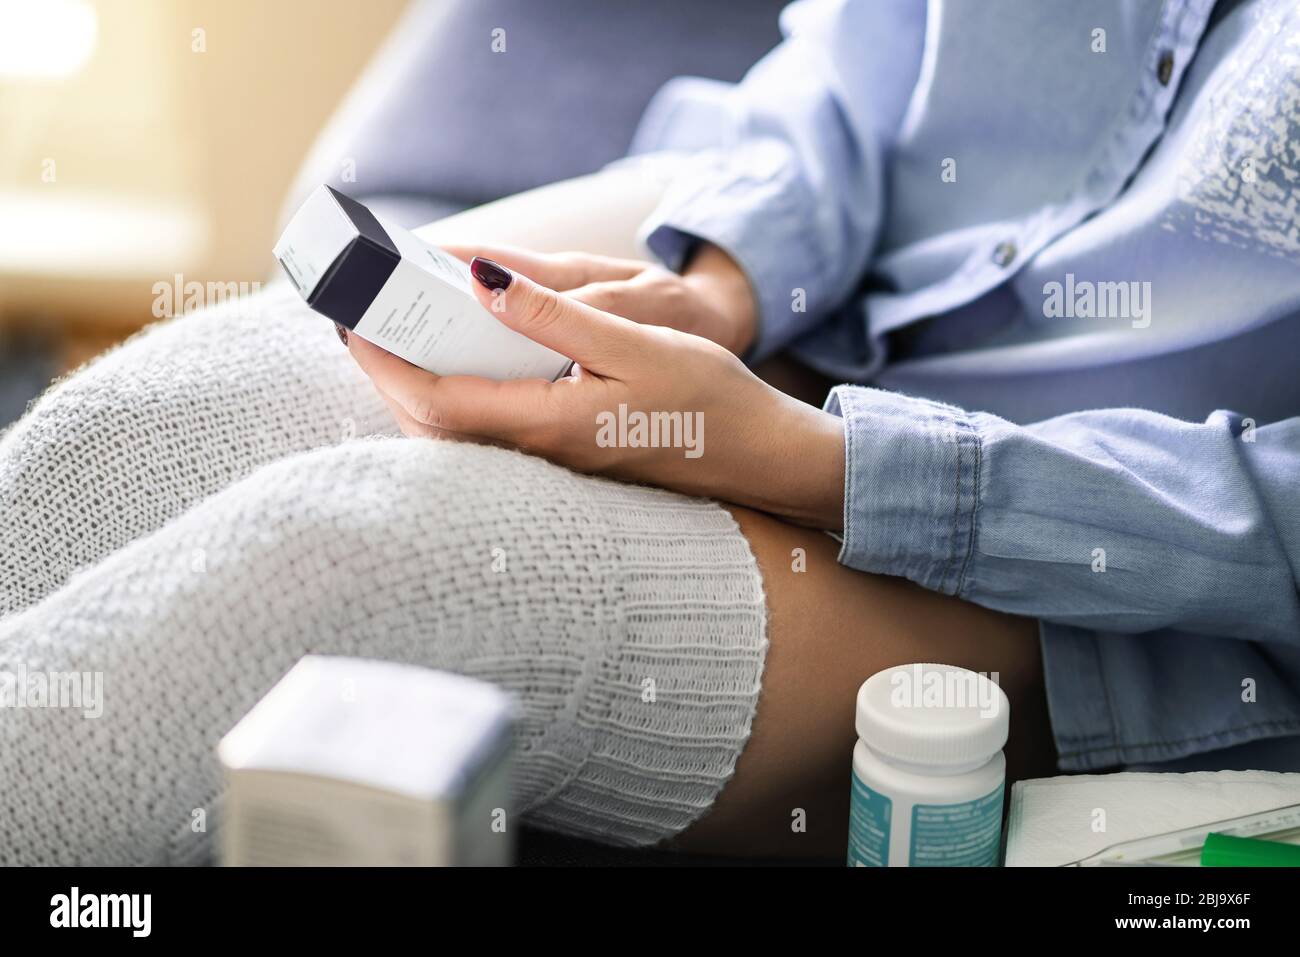 Medicine for flu, virus or pain. Ill woman reading label information of a medical product. Medication for cough and recovery. Sick unwell person. Stock Photo